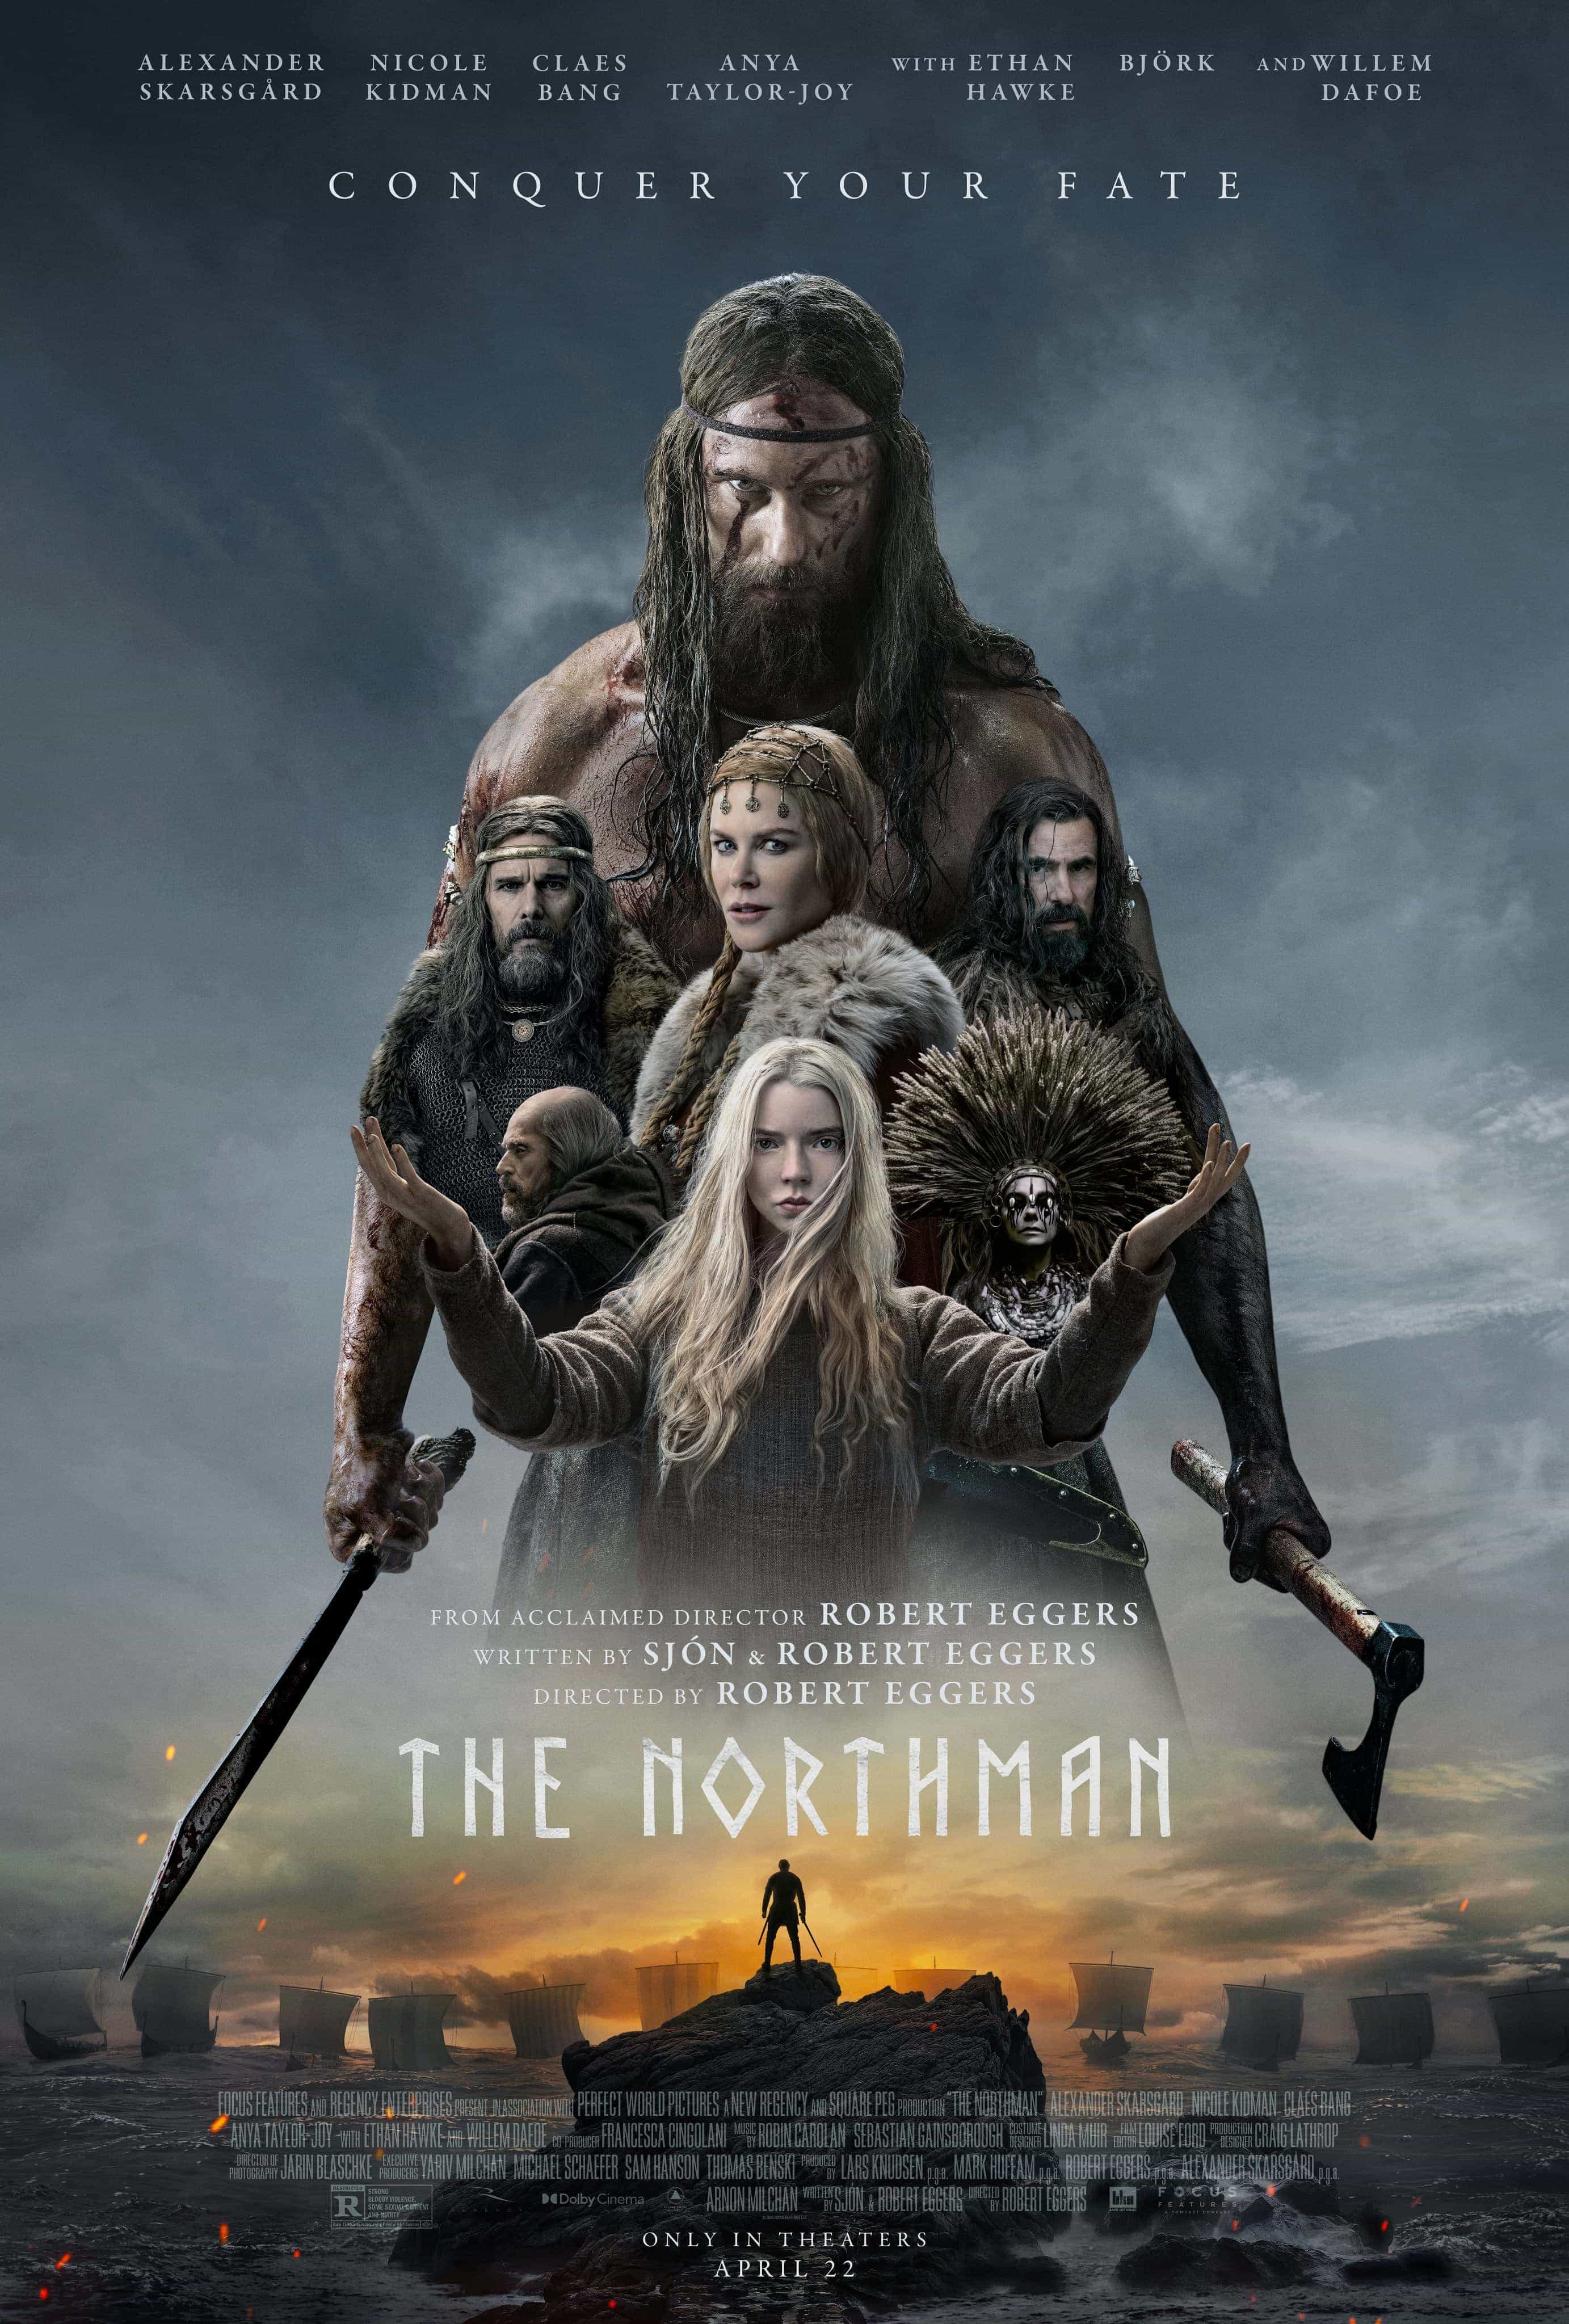 The Northman is given a 15 age rating in the UK for strong bloody violence, gore, sexual violence, sex, nudity